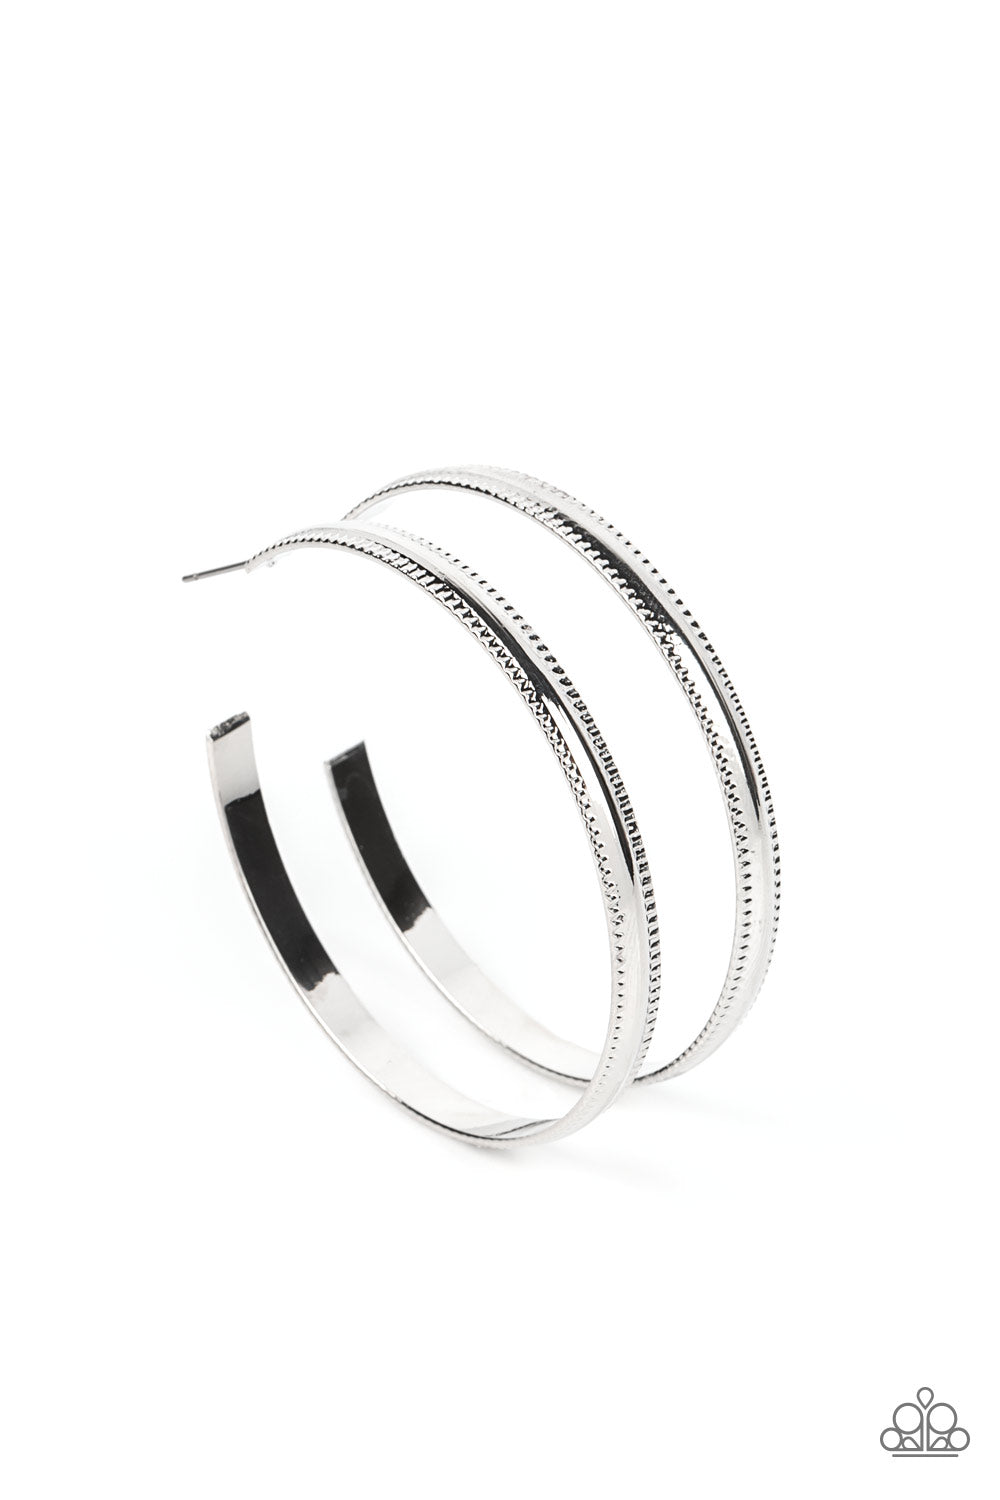 Monochromatic Magnetism Paparazzi Accessories Hoop Earrings Silver